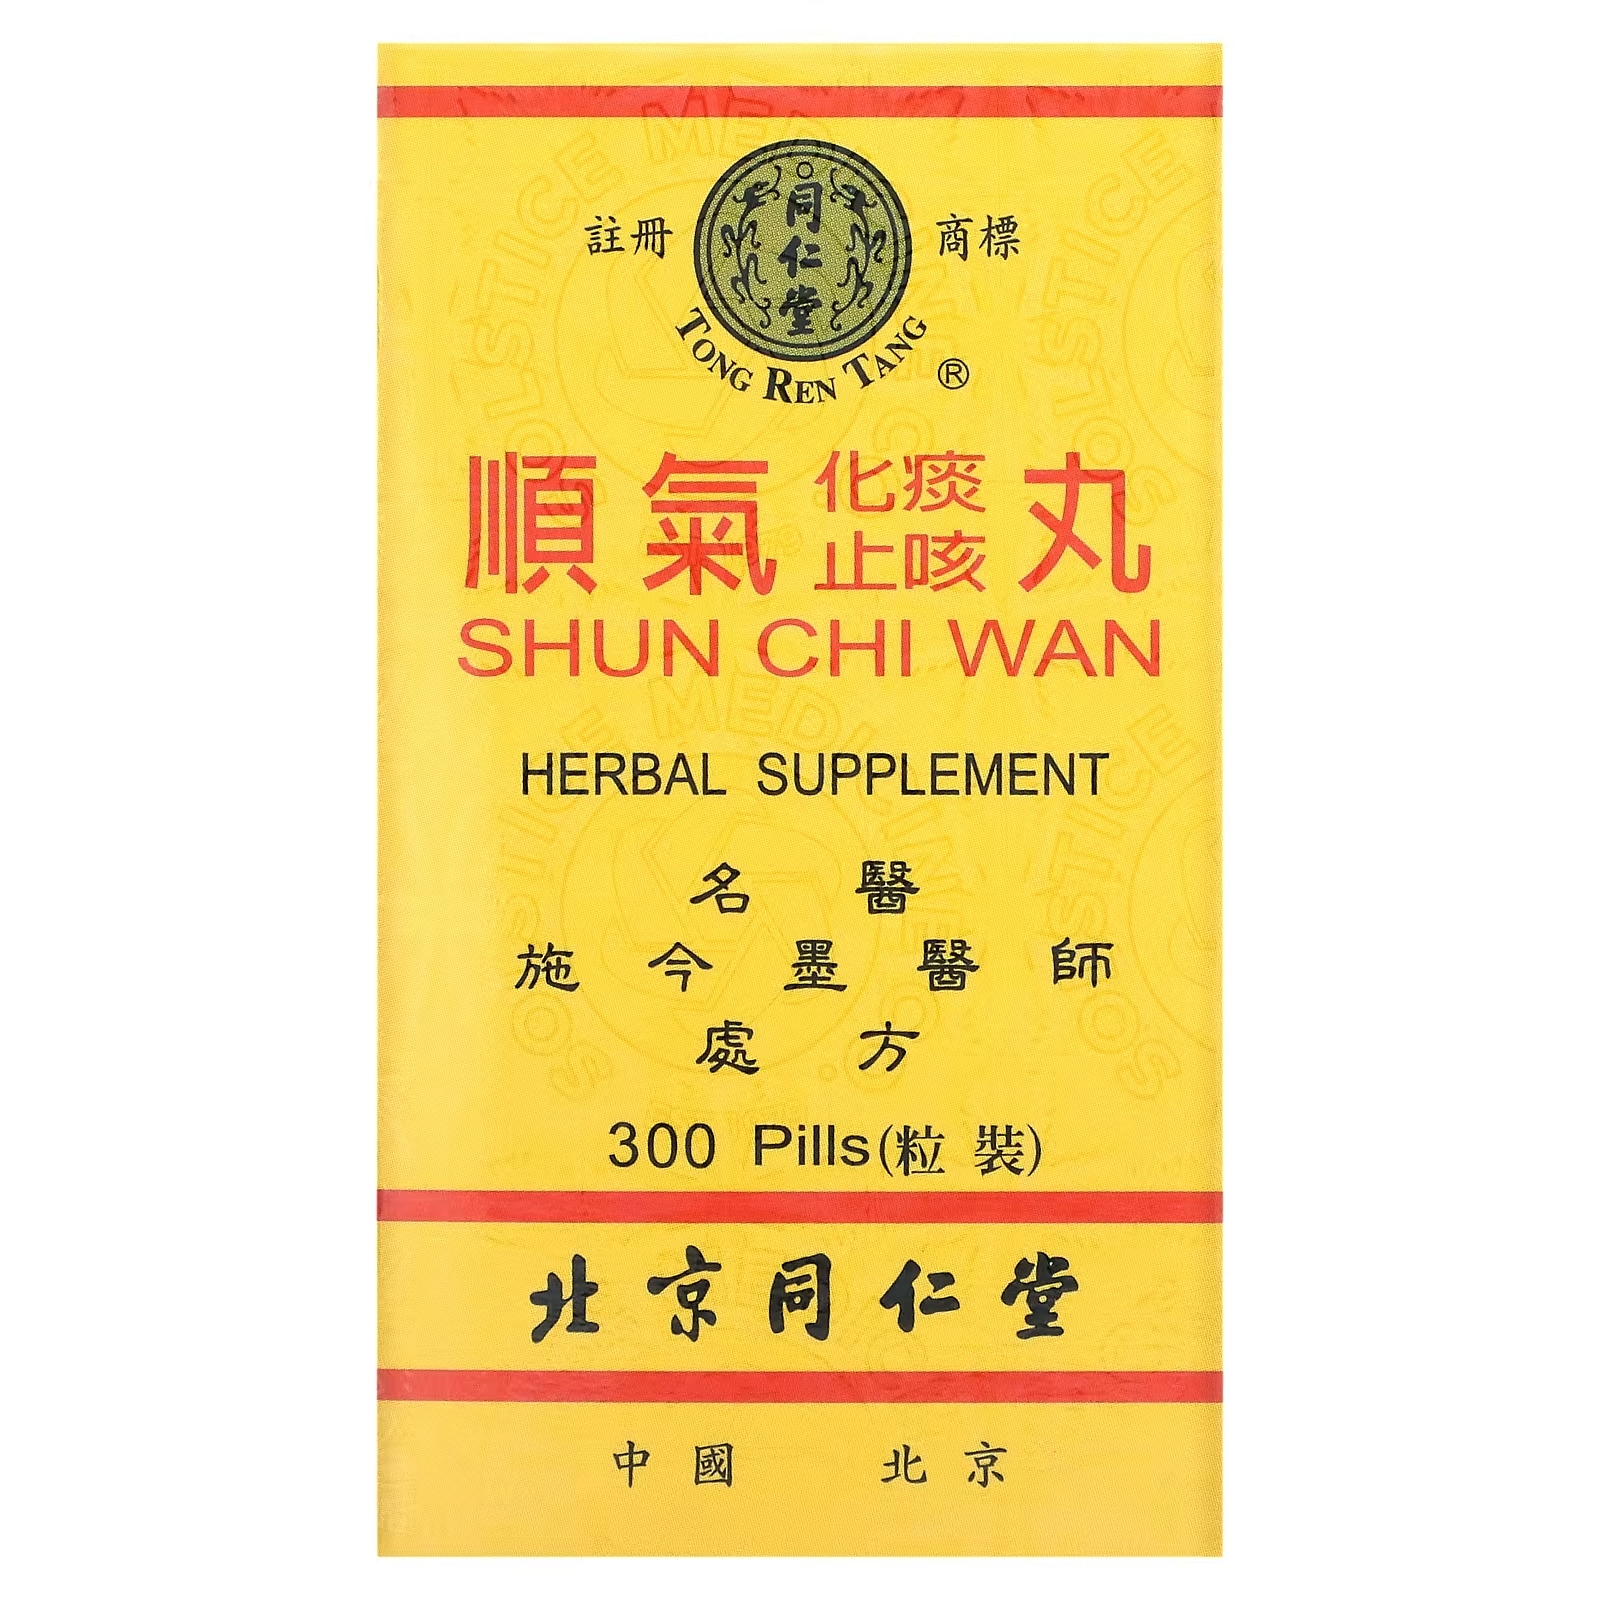 Tong Ren Tang Shun Chi Wan Supports the Health of the Nose Throat Larynx Trachea and Lungs, 300 таблеток